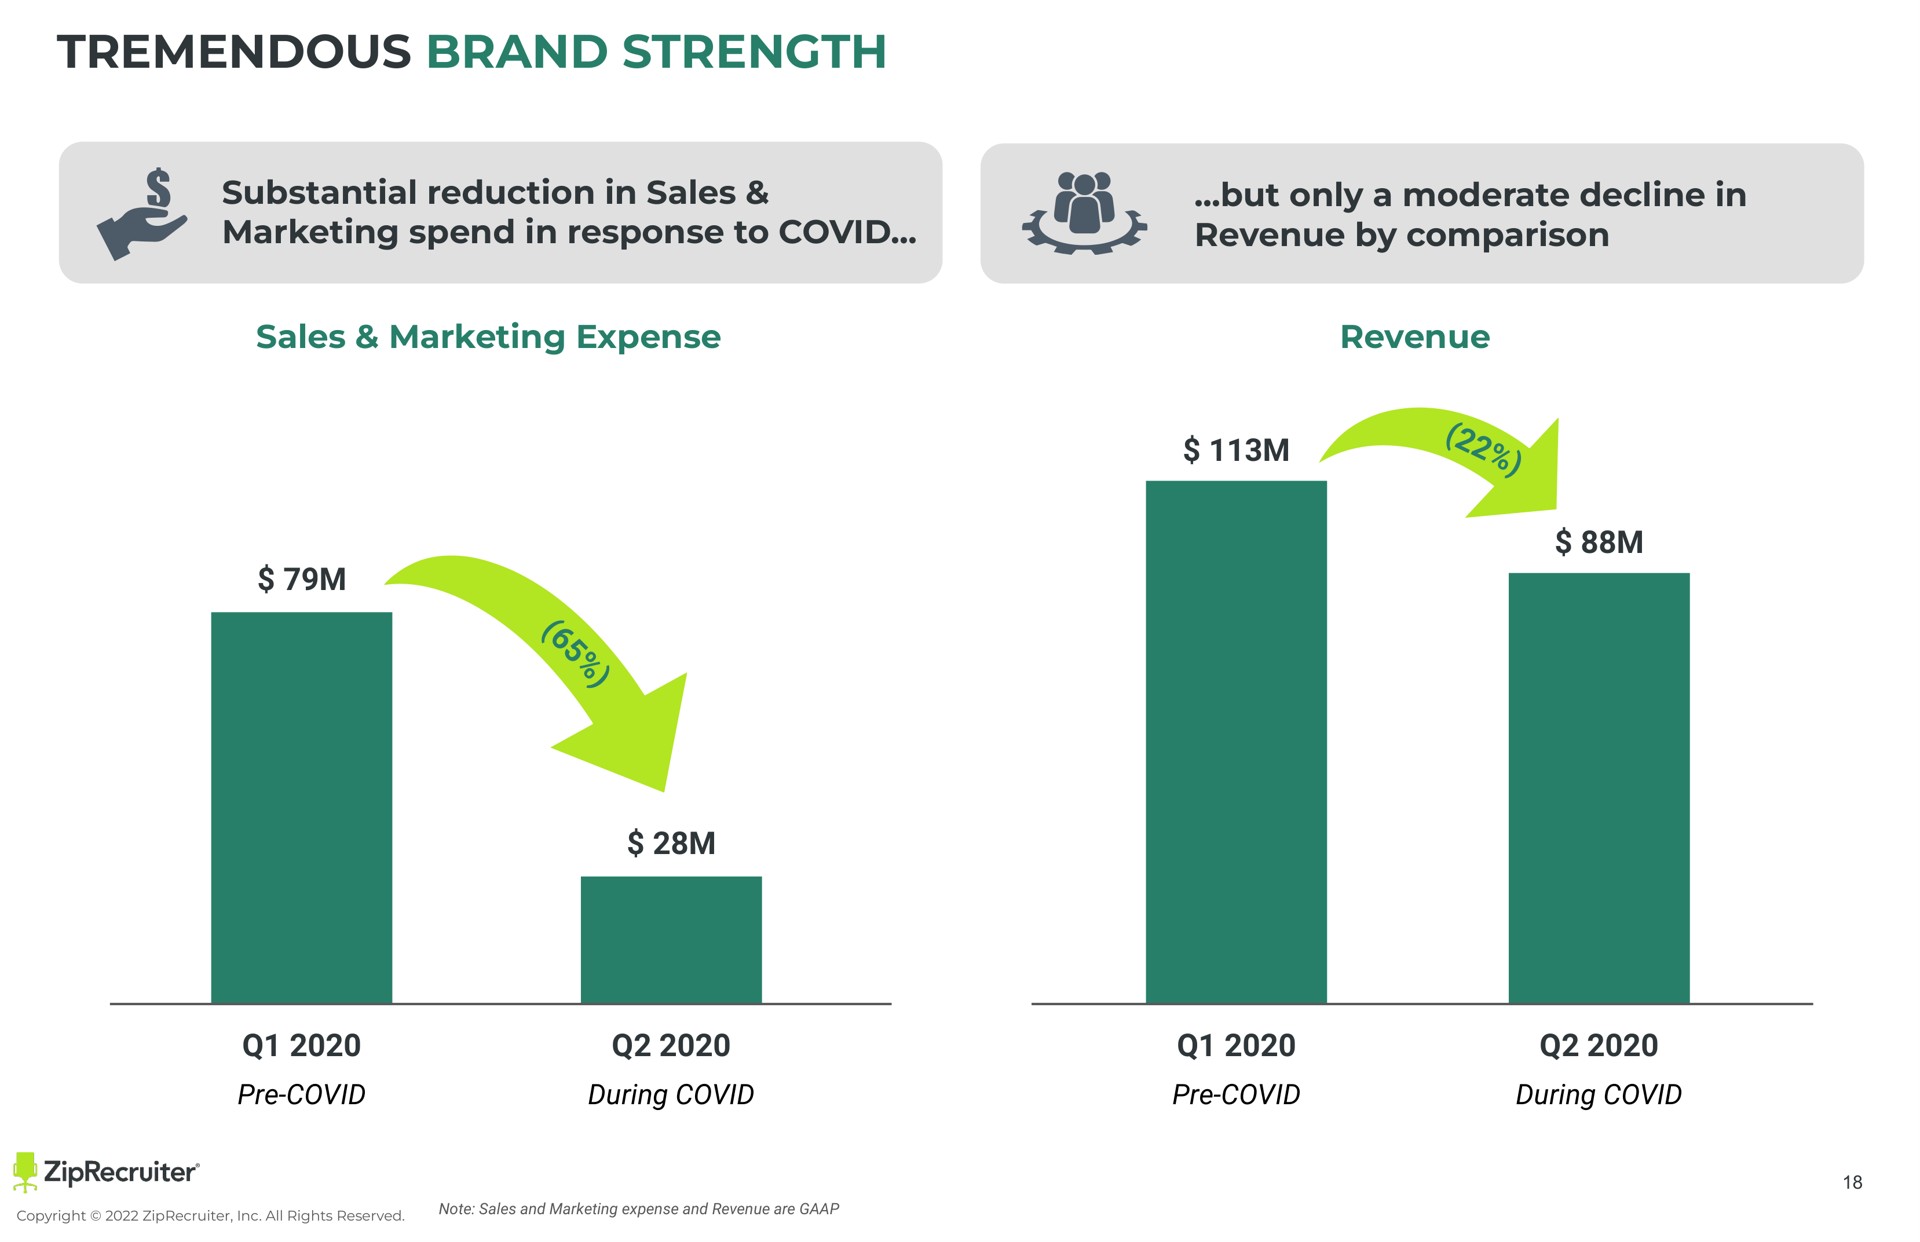 tremendous brand strength substantial reduction in sales marketing spend in response to covid but only a moderate decline in revenue by comparison sales marketing expense revenue covid during covid covid during covid rog | ZipRecruiter